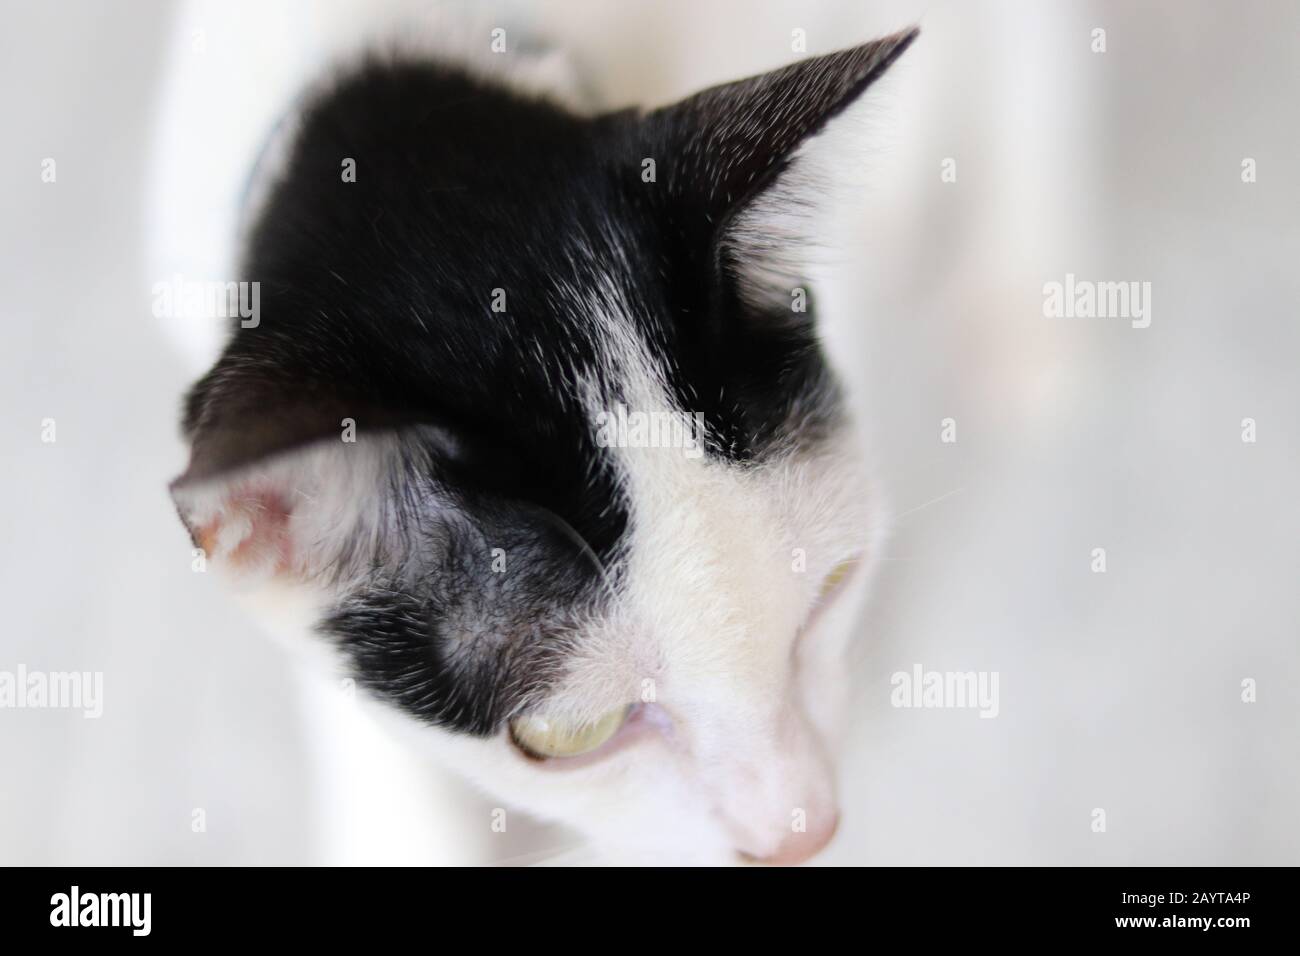 High angle view of a cat's head on a white background Stock Photo